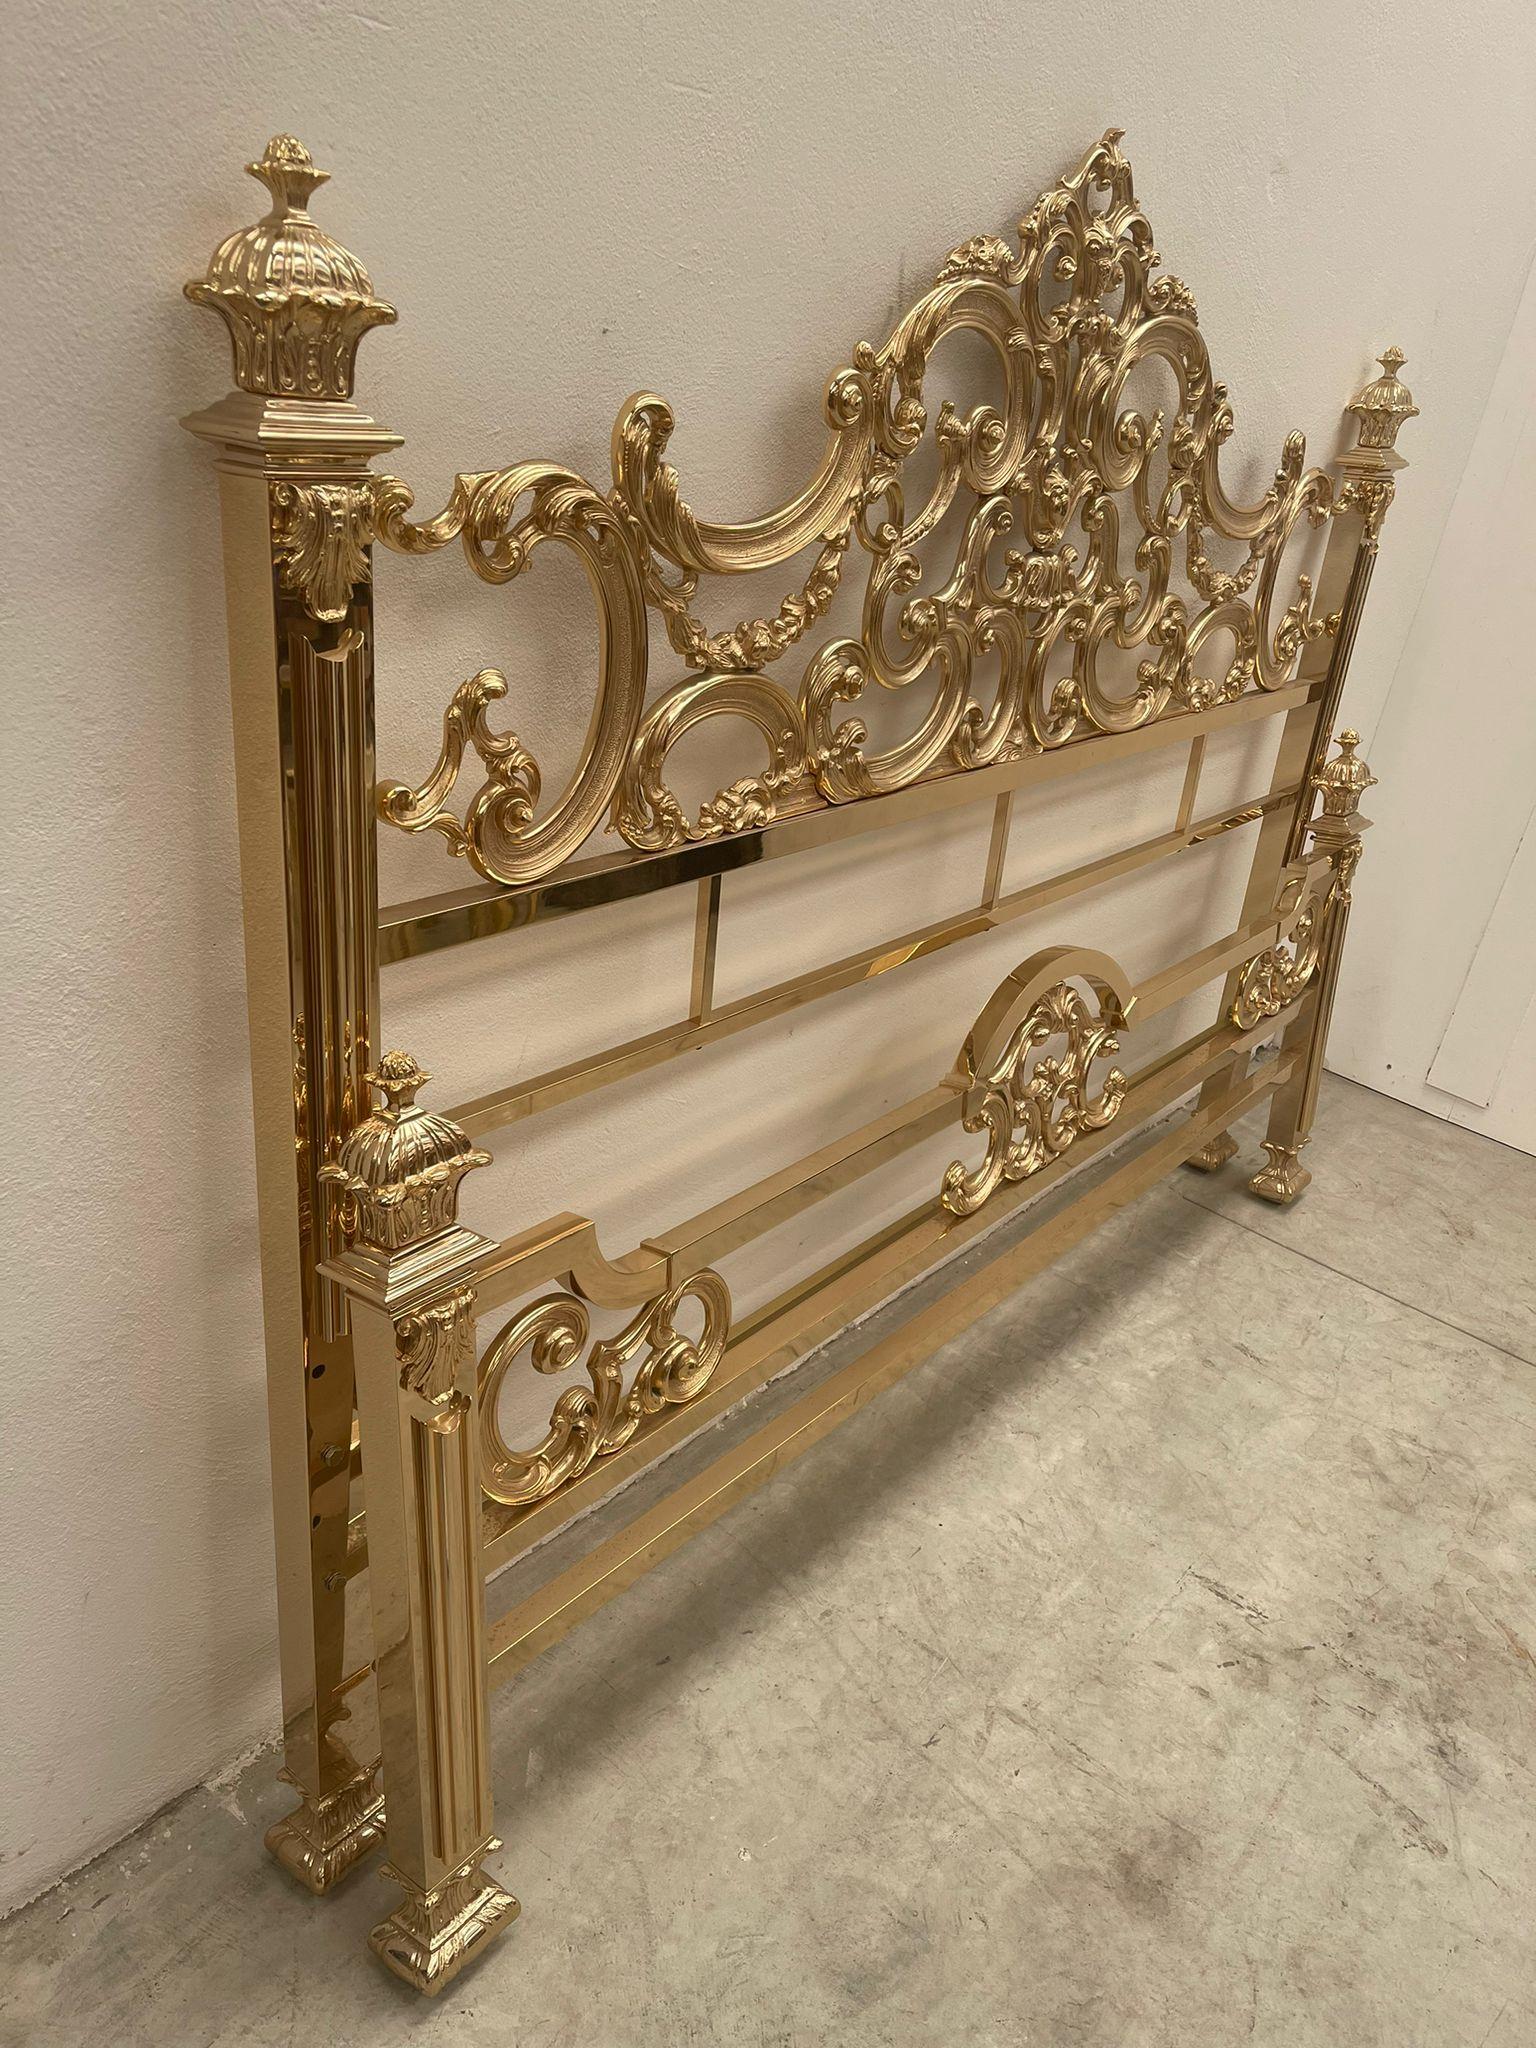 Regency frame and headboard designed by Mice Versailles in the 1970s. Italian Art Double bed and full size made all by brass. 
In very good condition.

The price is related to frame and headborad.